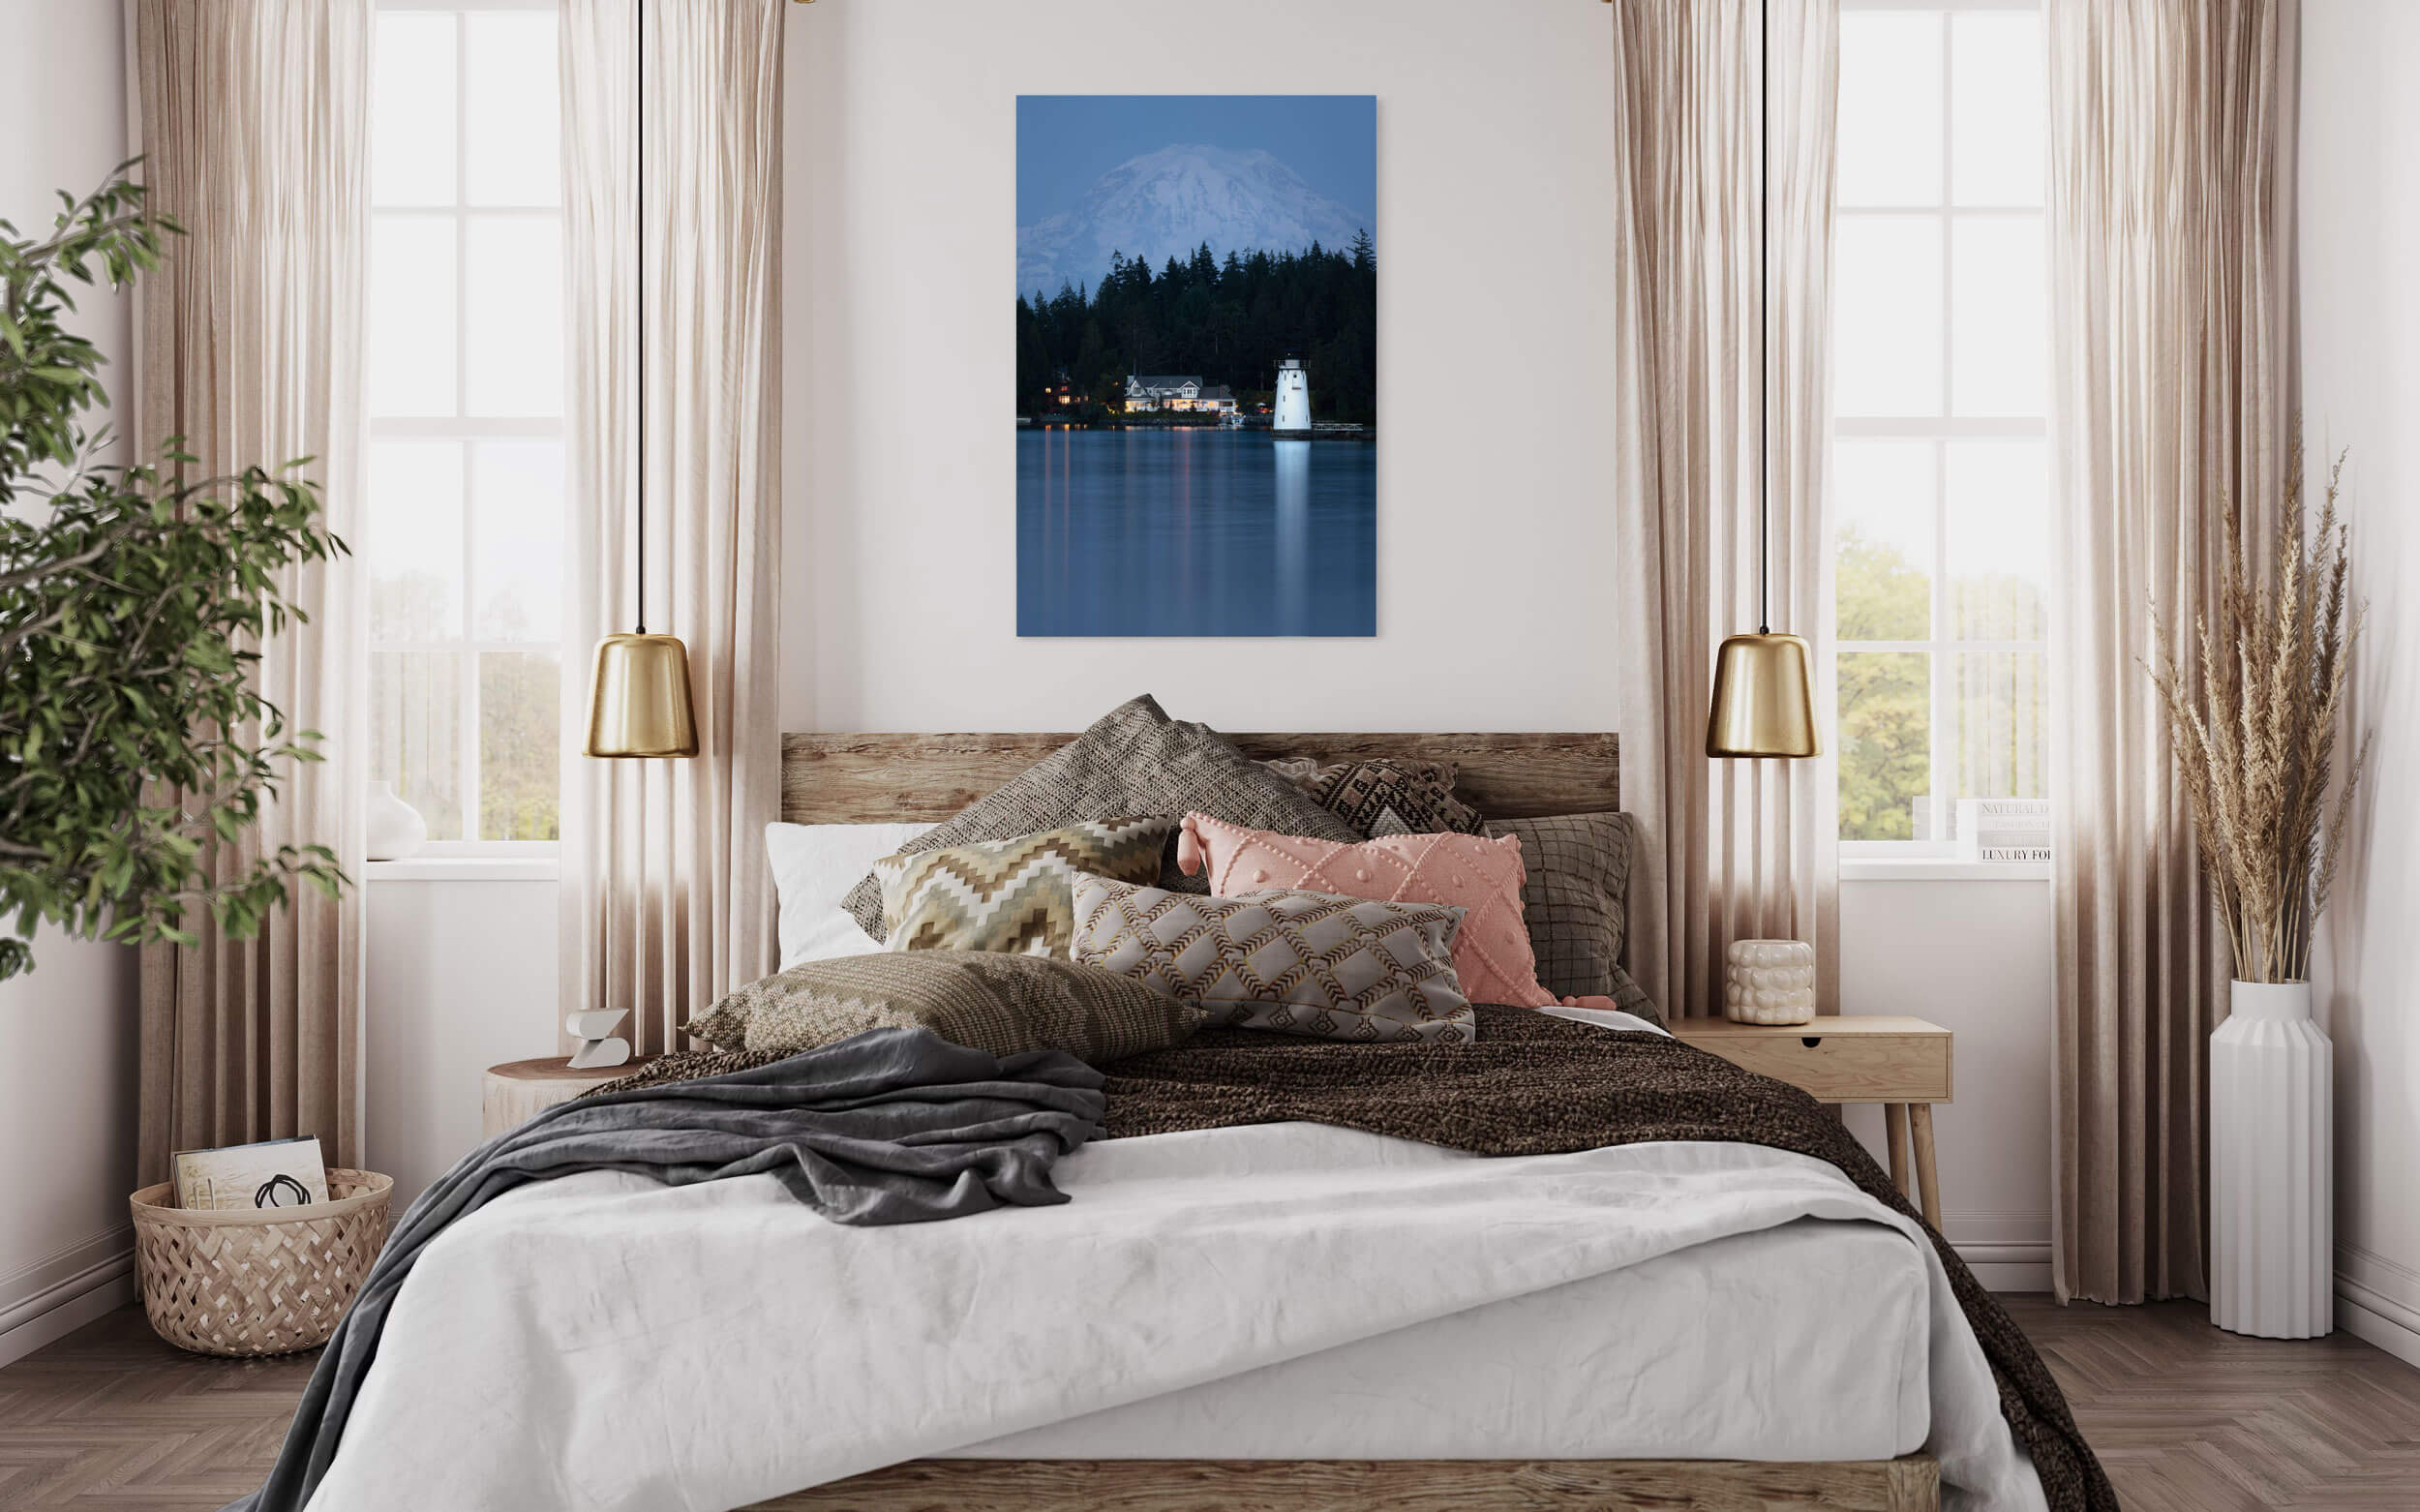 A Fox Island Lighthouse picture with Mount Rainier in the background hangs in a bedroom.